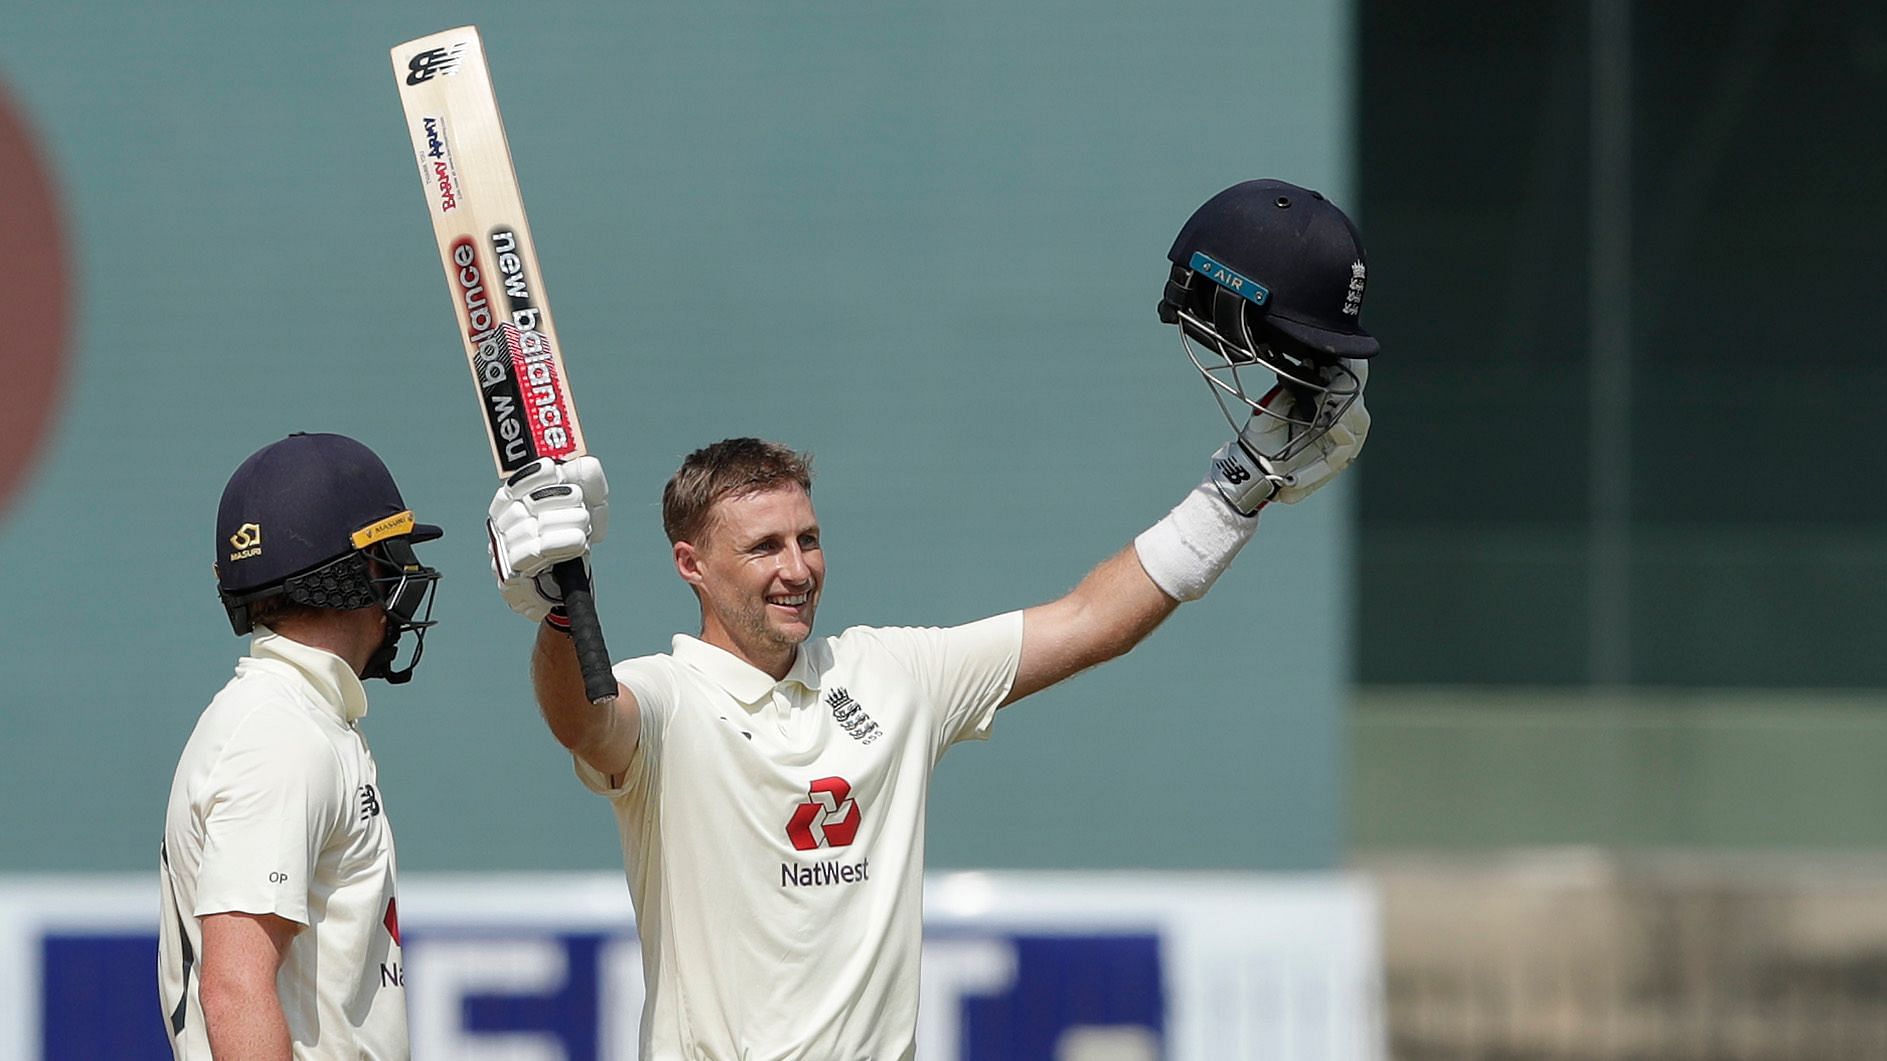 England captain Joe Root after completing his double century.